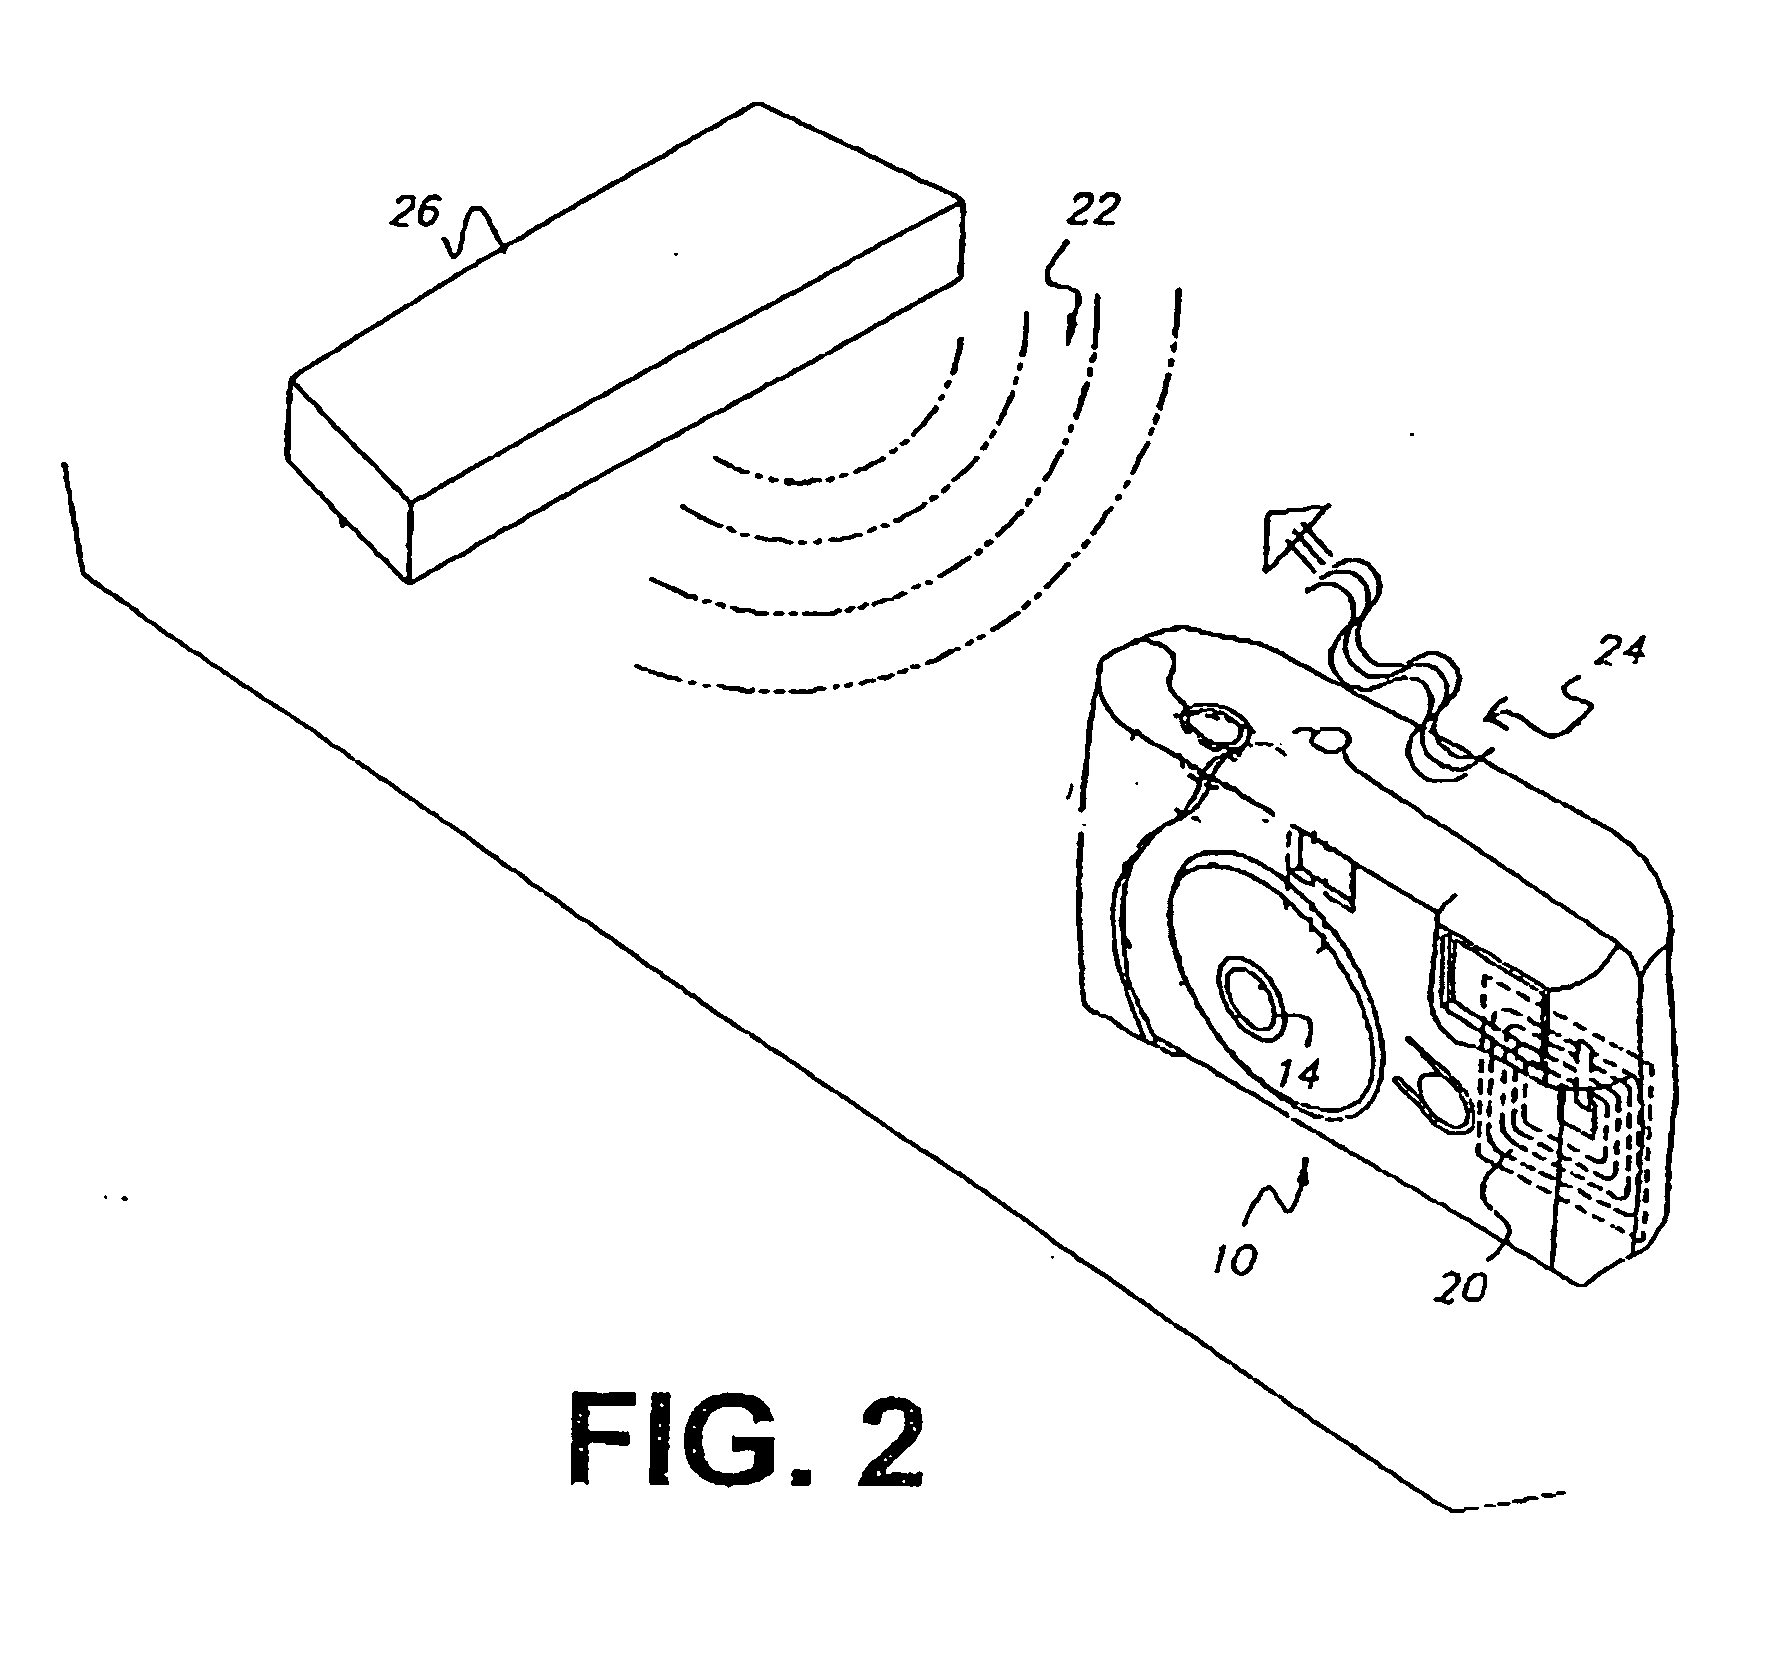 System and method for providing a customized imaging product or service